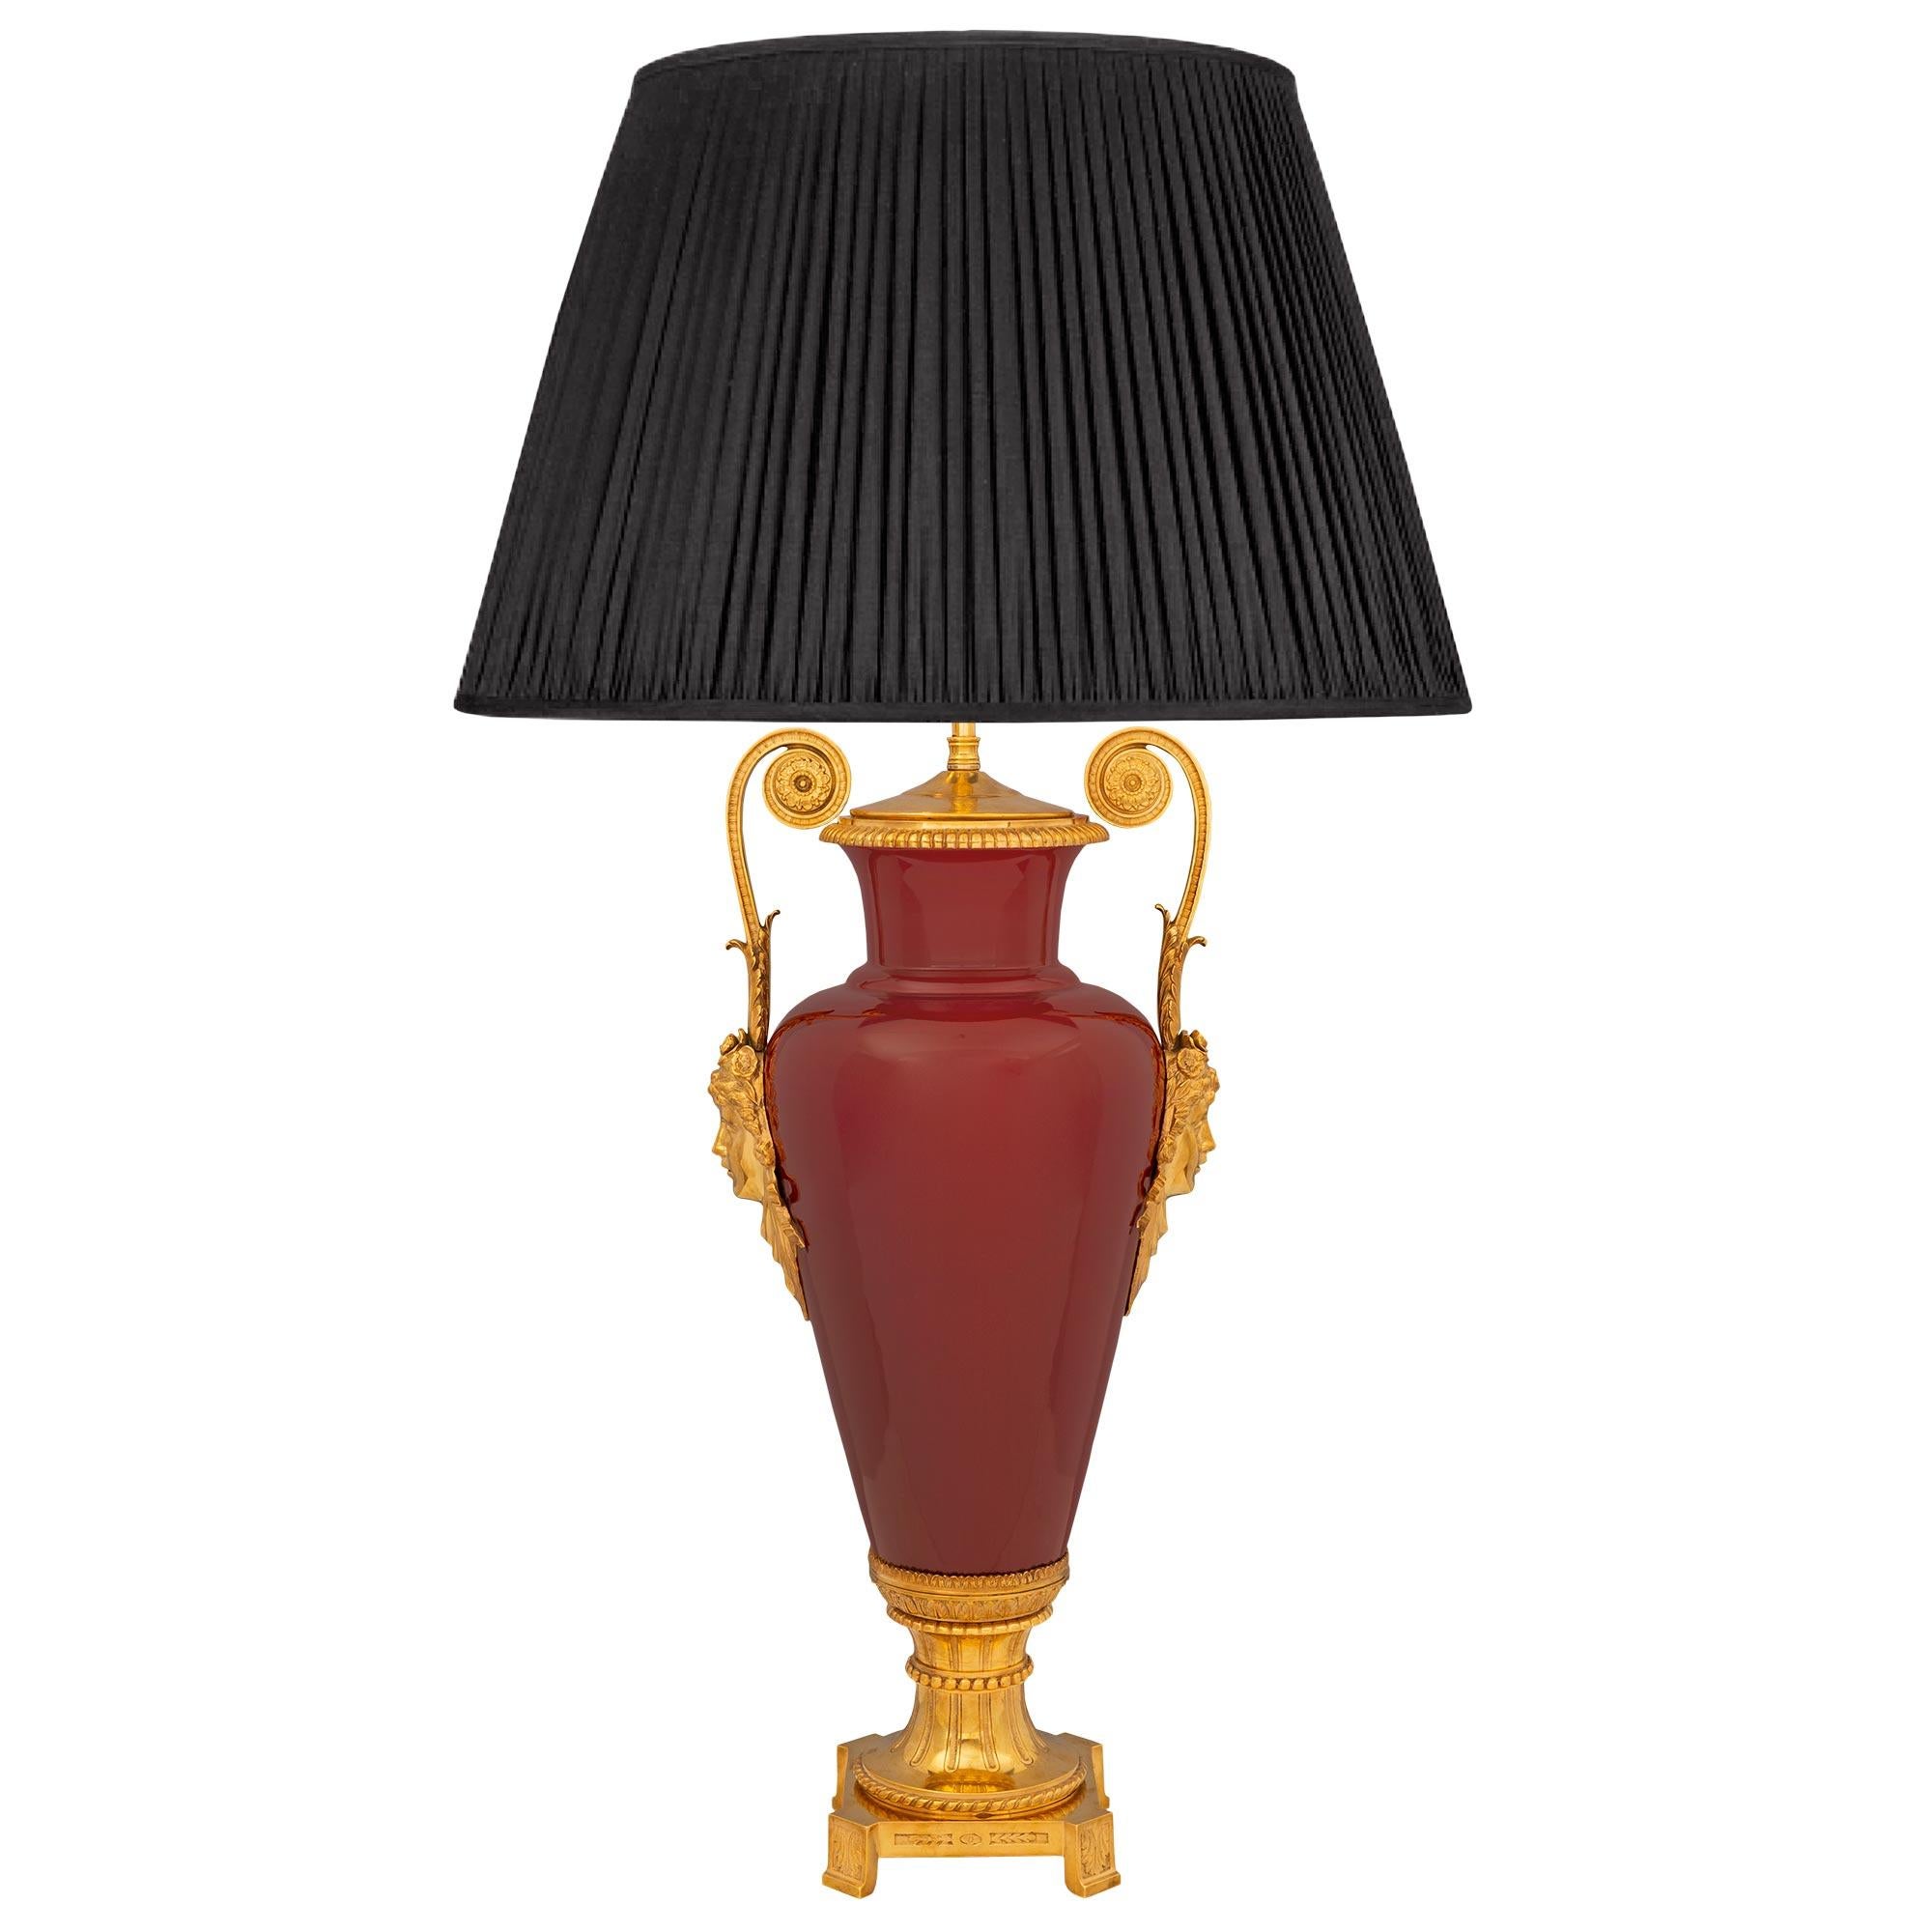 A large scale and most elegant French 19th century Louis XVI st. oxblood red porcelain and ormolu lamp. The lamp is raised by a square ormolu base with cut corners, foliate feet, and a fluted socle shaped pedestal support with fine beaded and